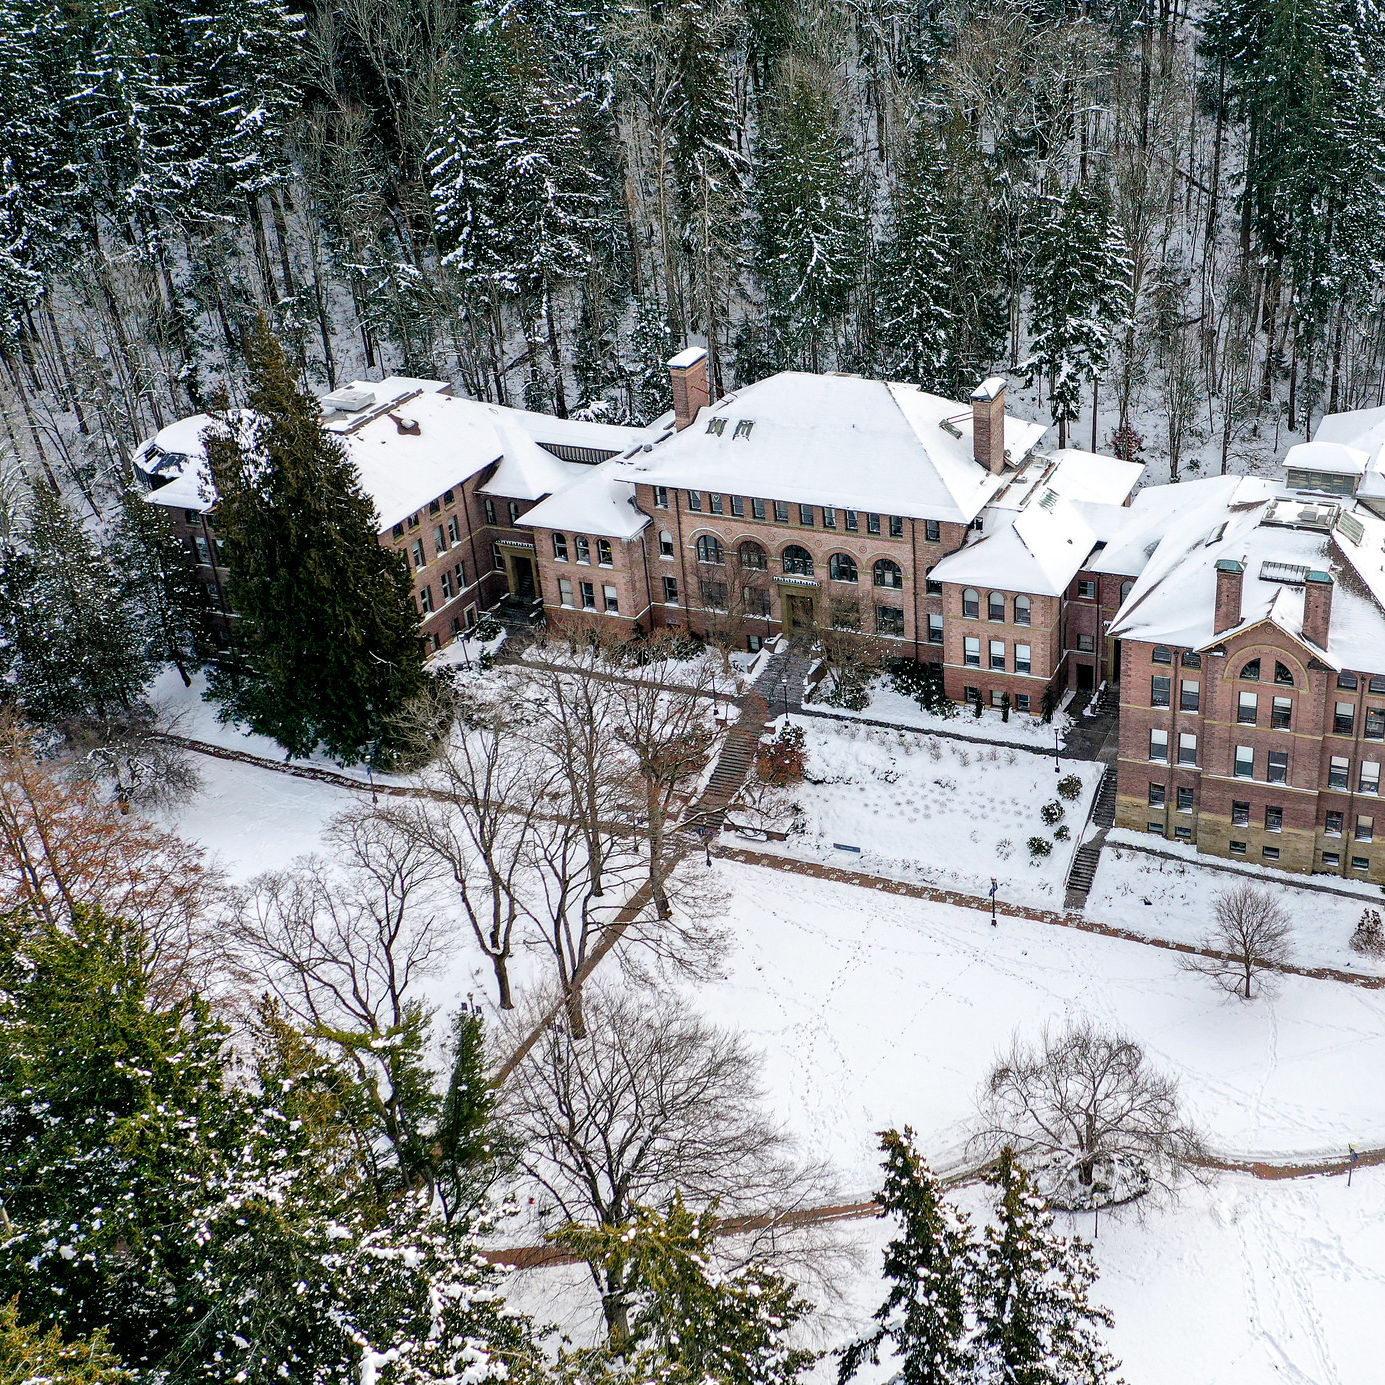 View of old main covered in snow from above